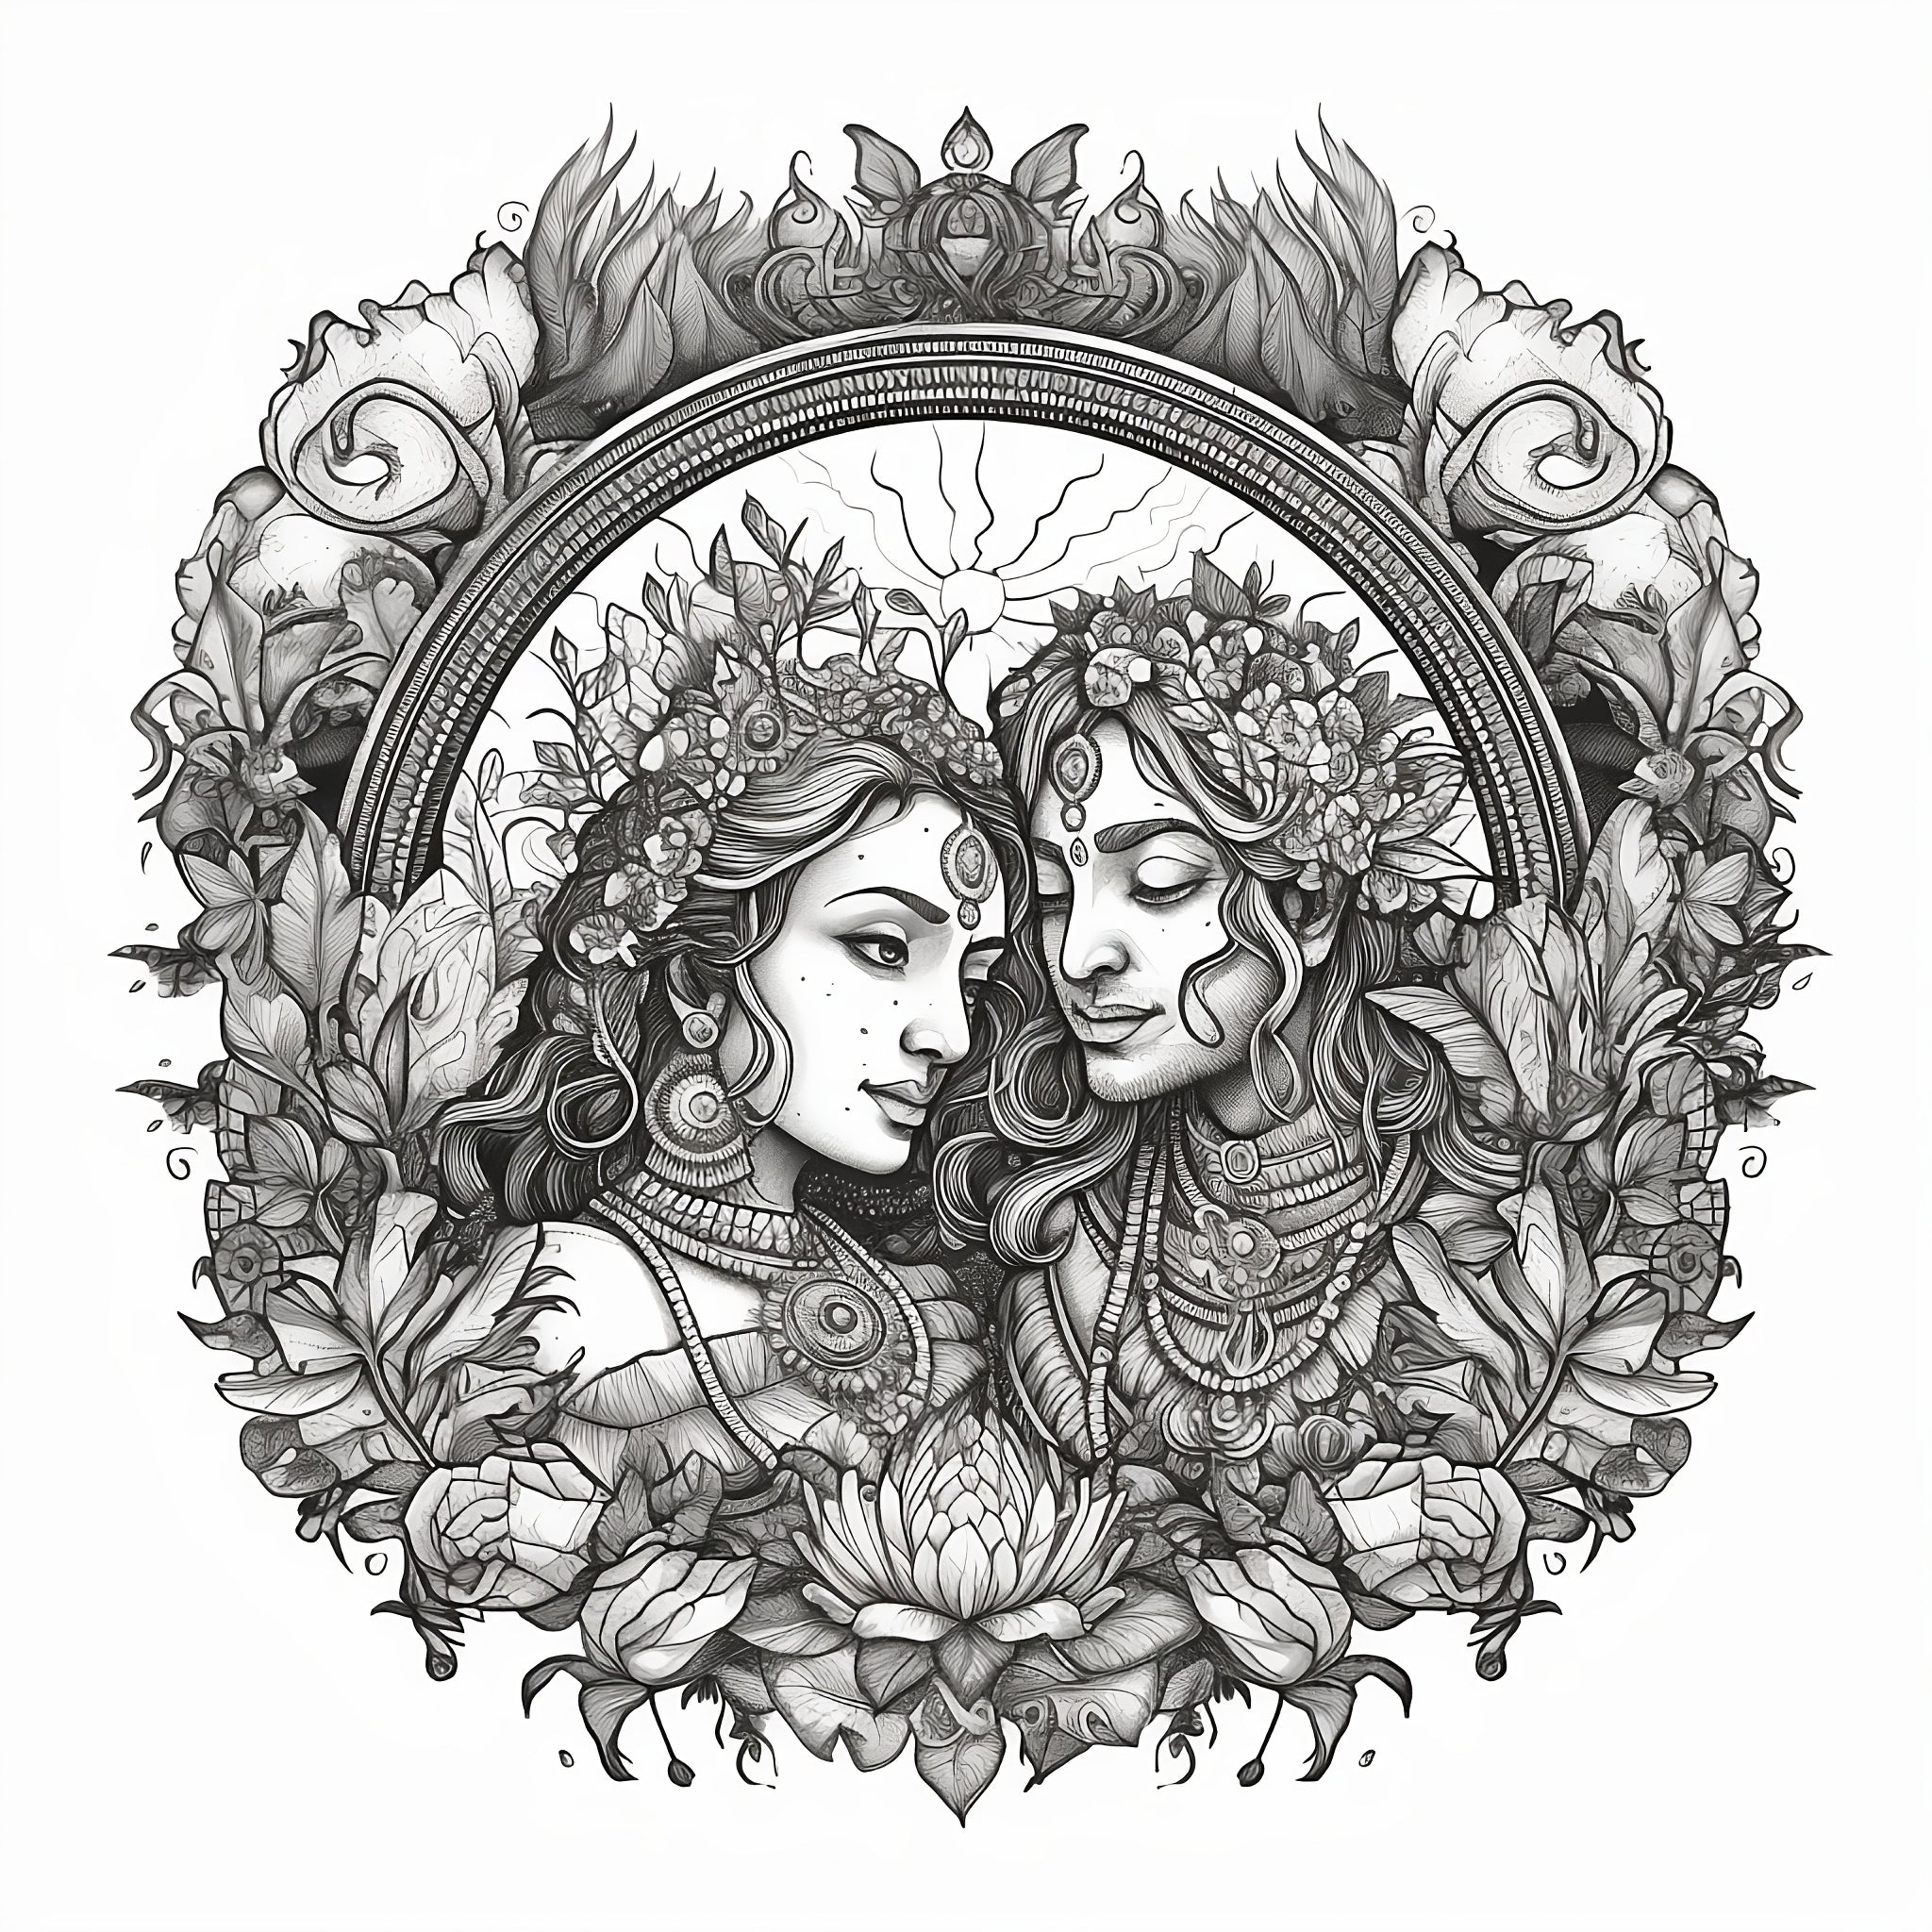 Divine Love in Zoodle Art: Detailed Black and White Sketch Print of Radha Krishna